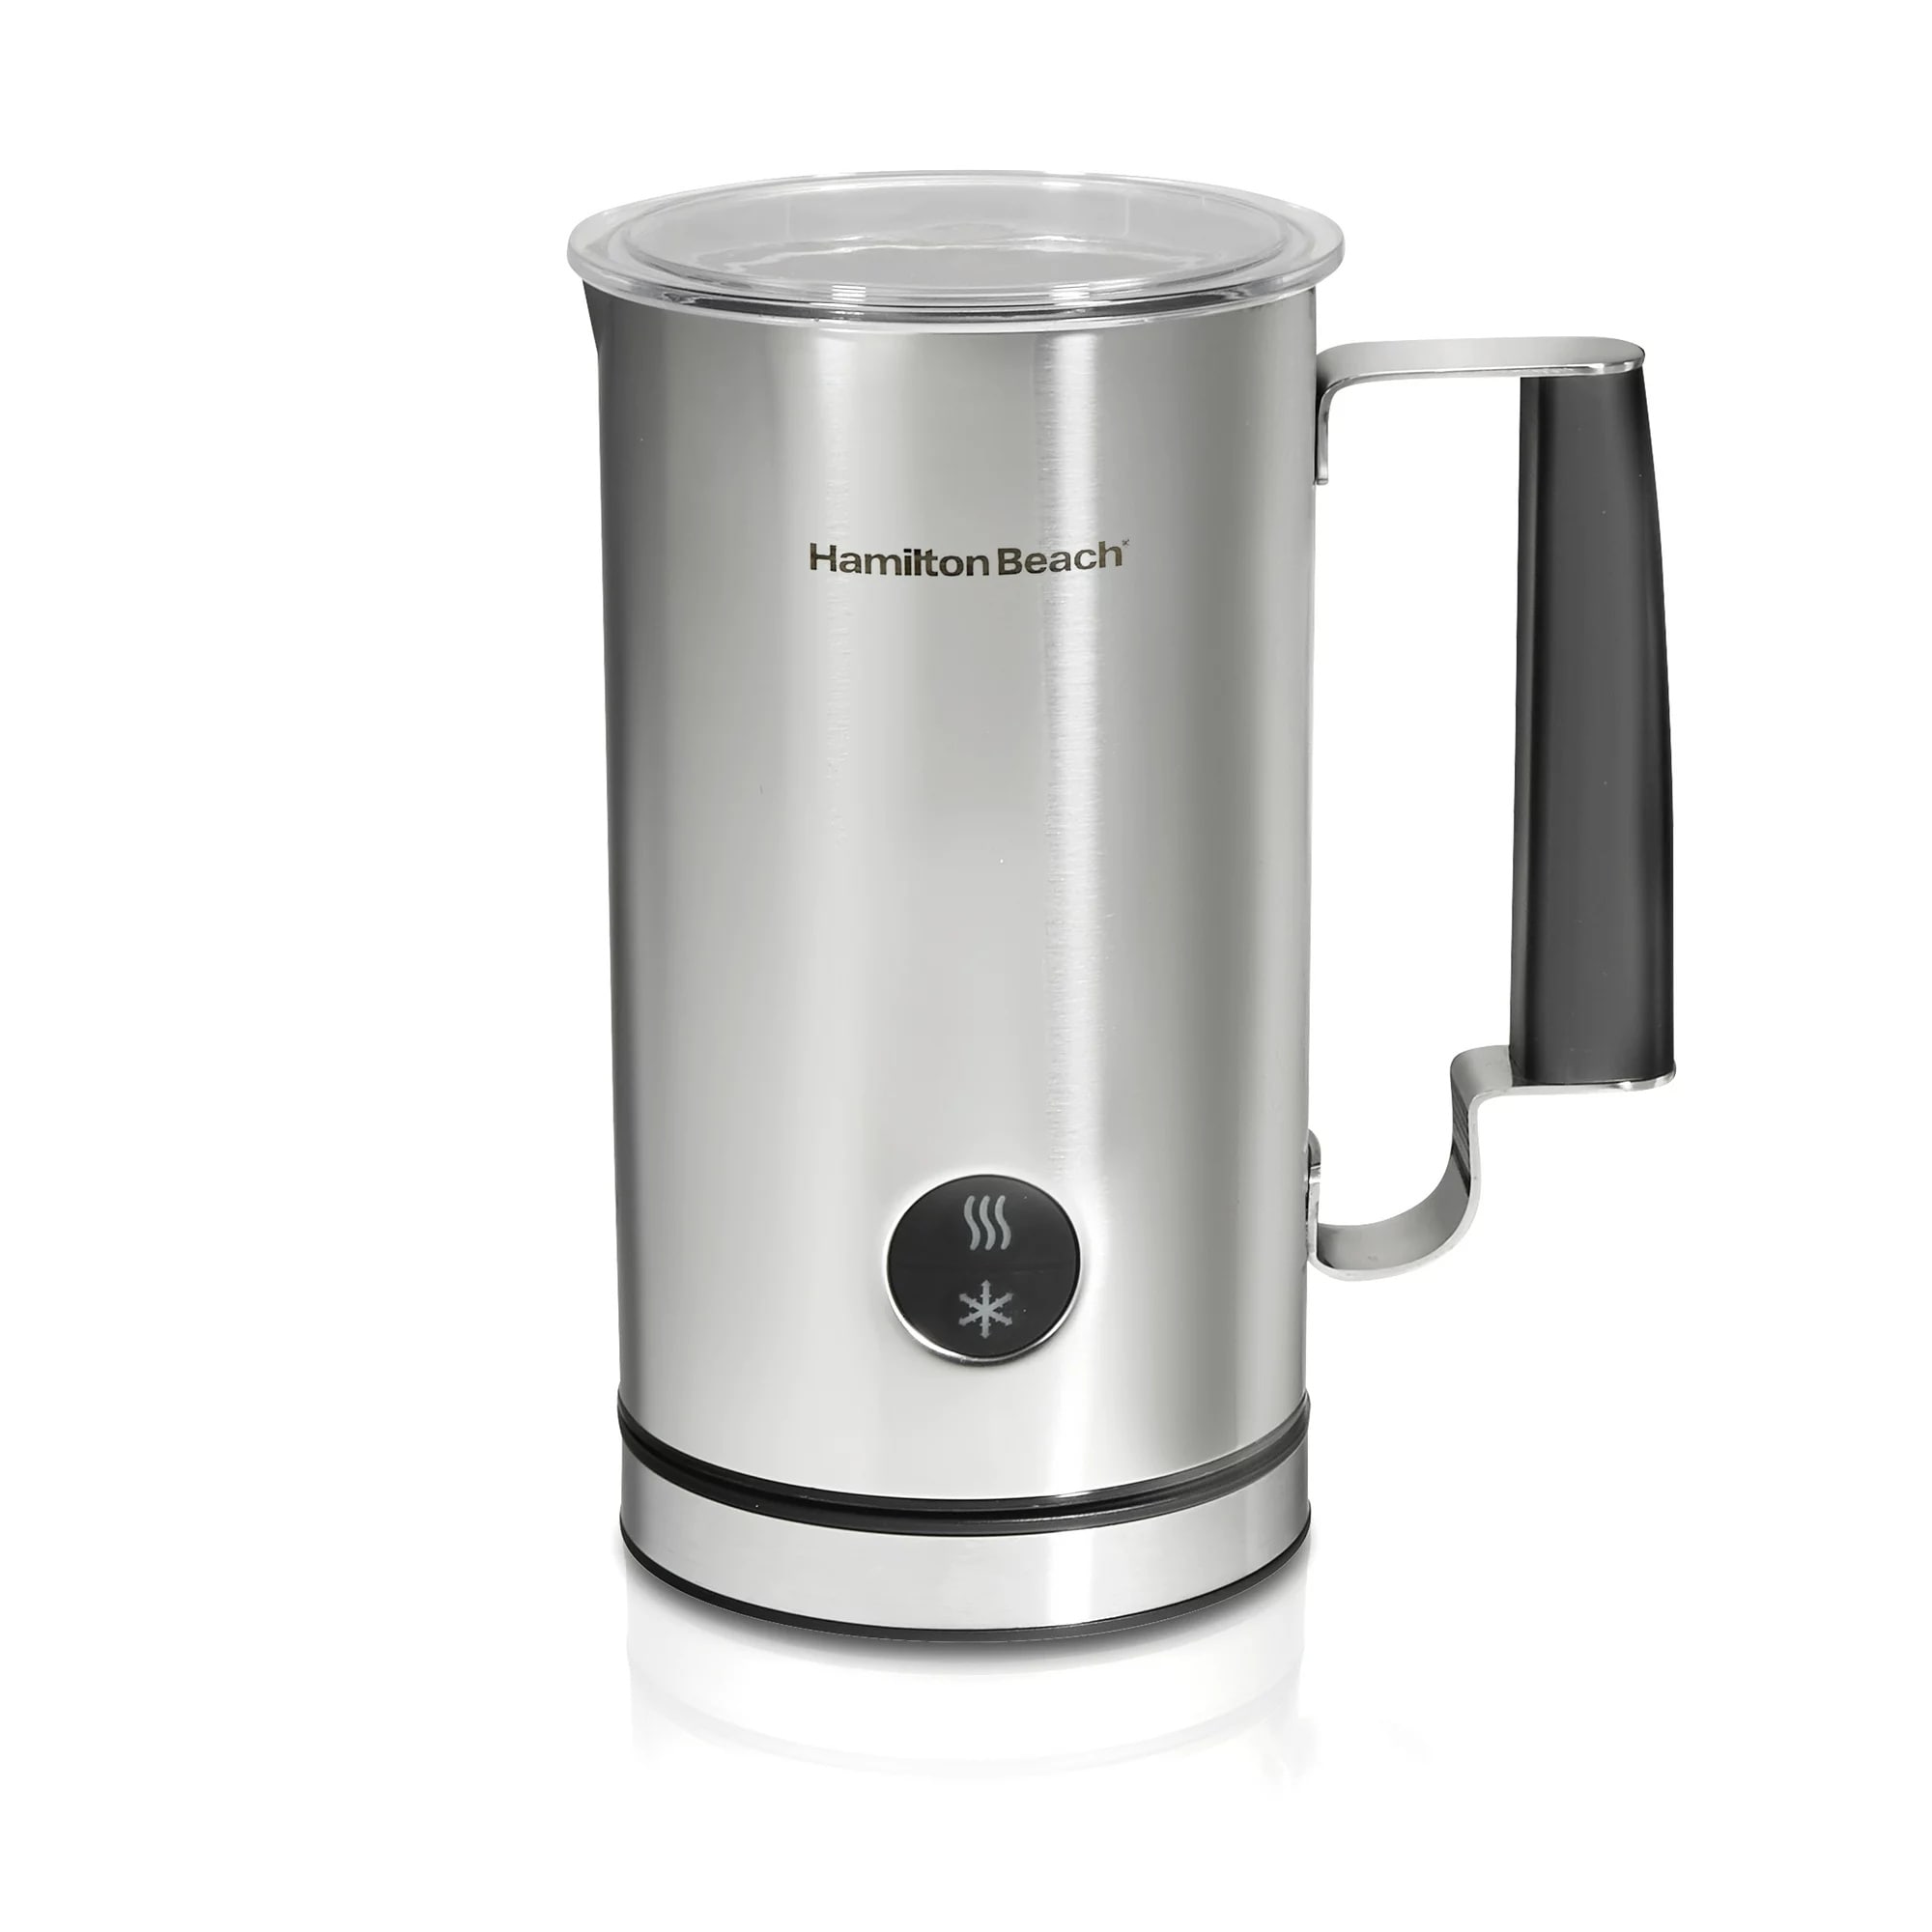 https://ak1.ostkcdn.com/images/products/is/images/direct/a79cf0735010d648788221e59e7a55445121ac28/Electric-Milk-Frother-and-Warmer.jpg